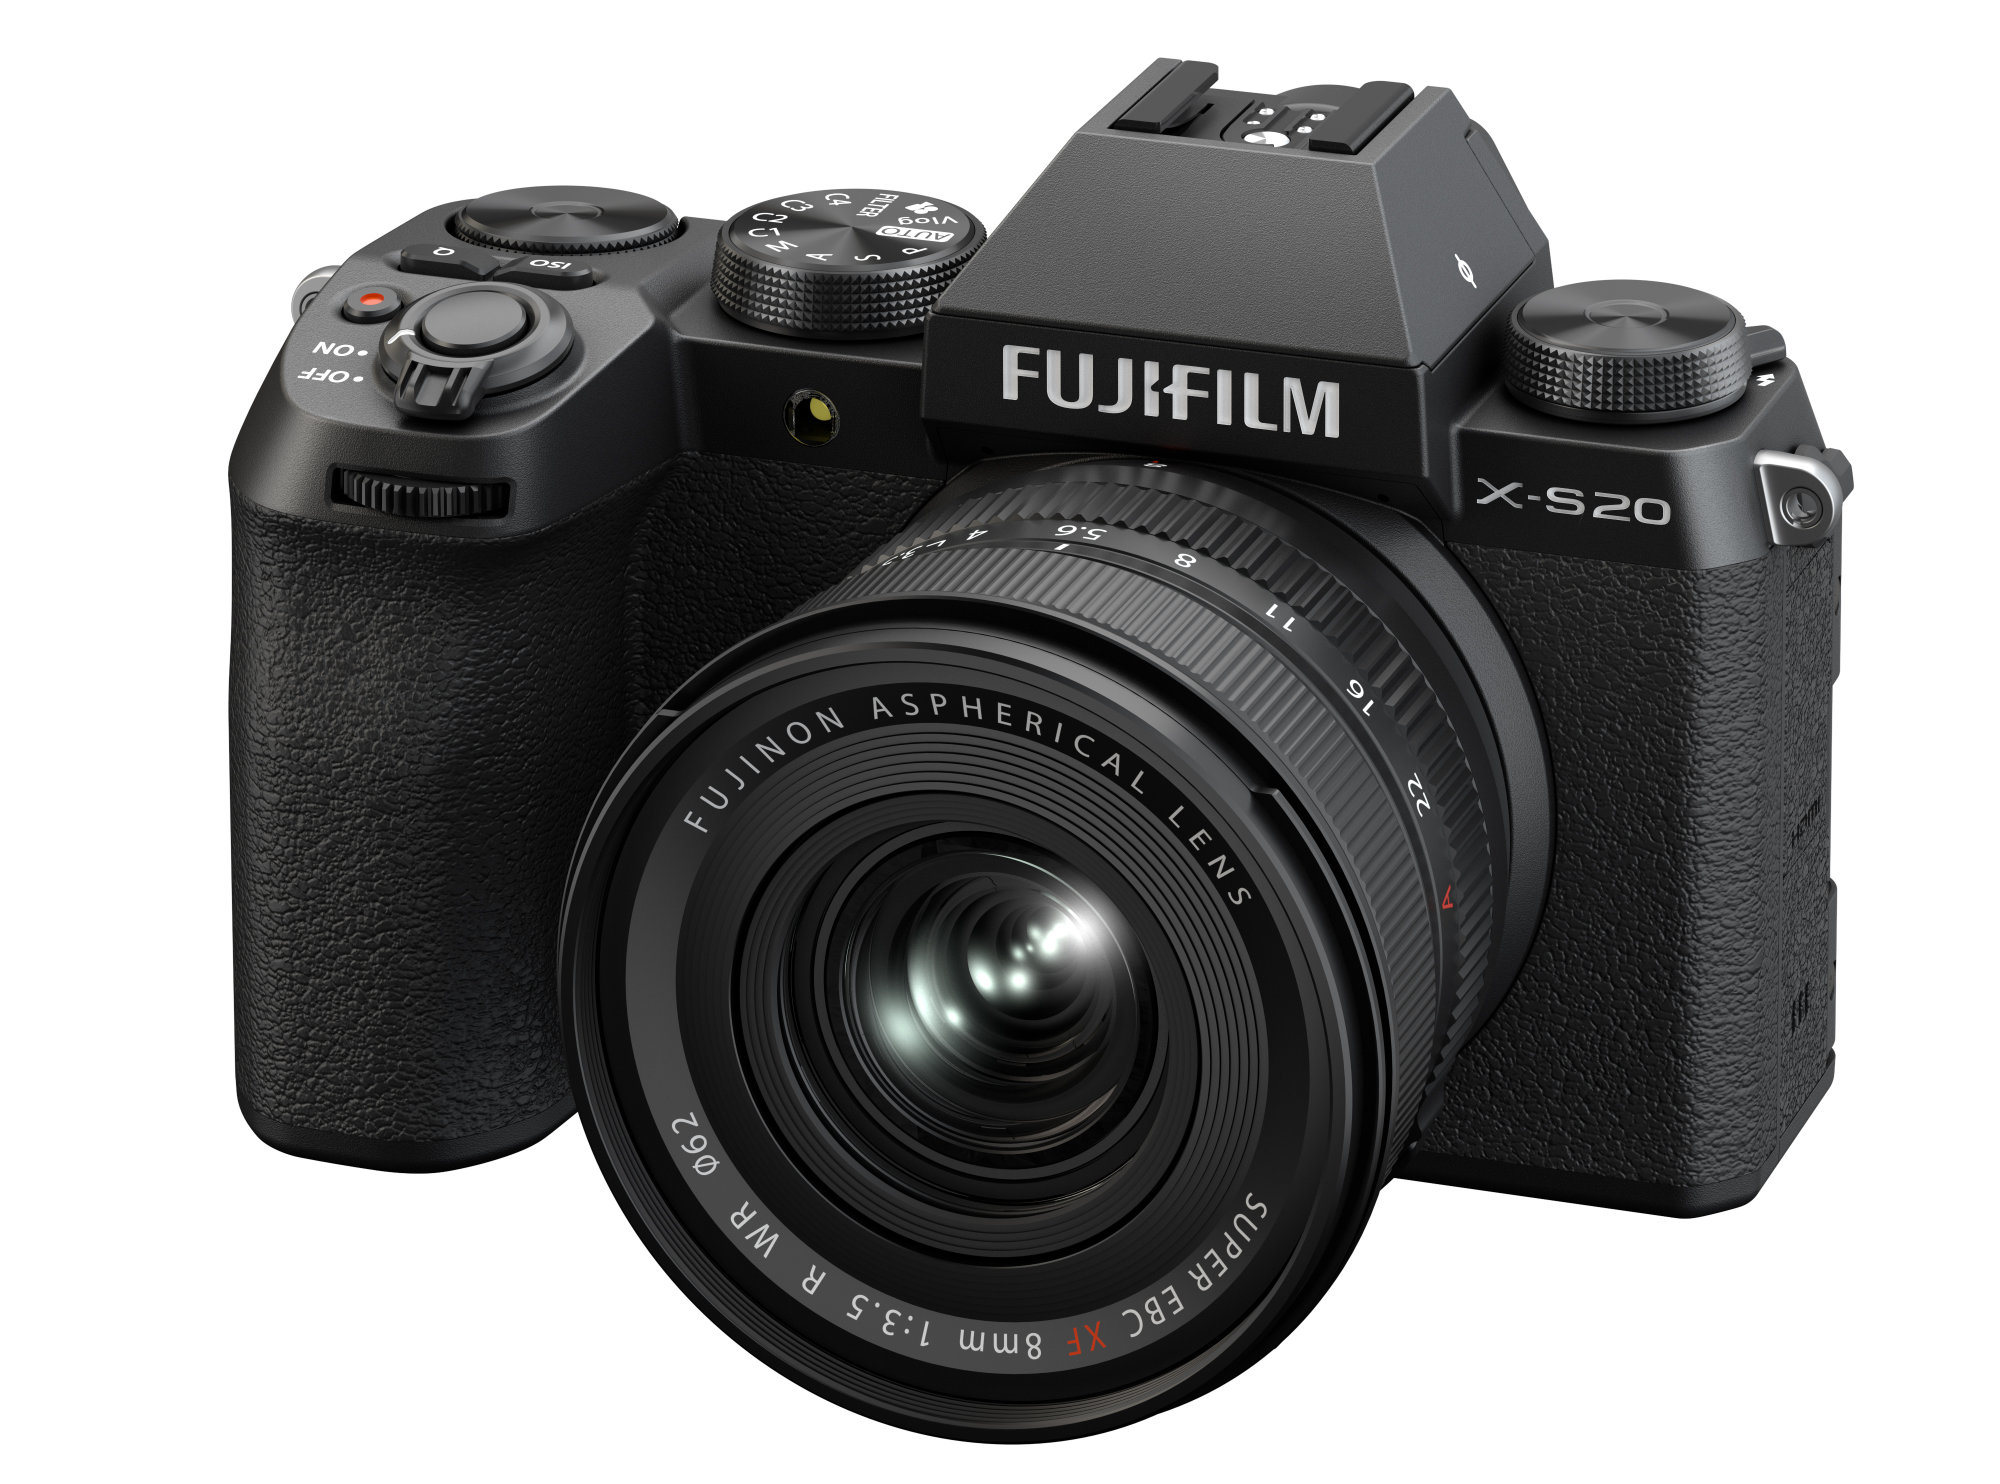 FUJIFILM X-S20 - Small and compact with 6K30p -S35 sensor